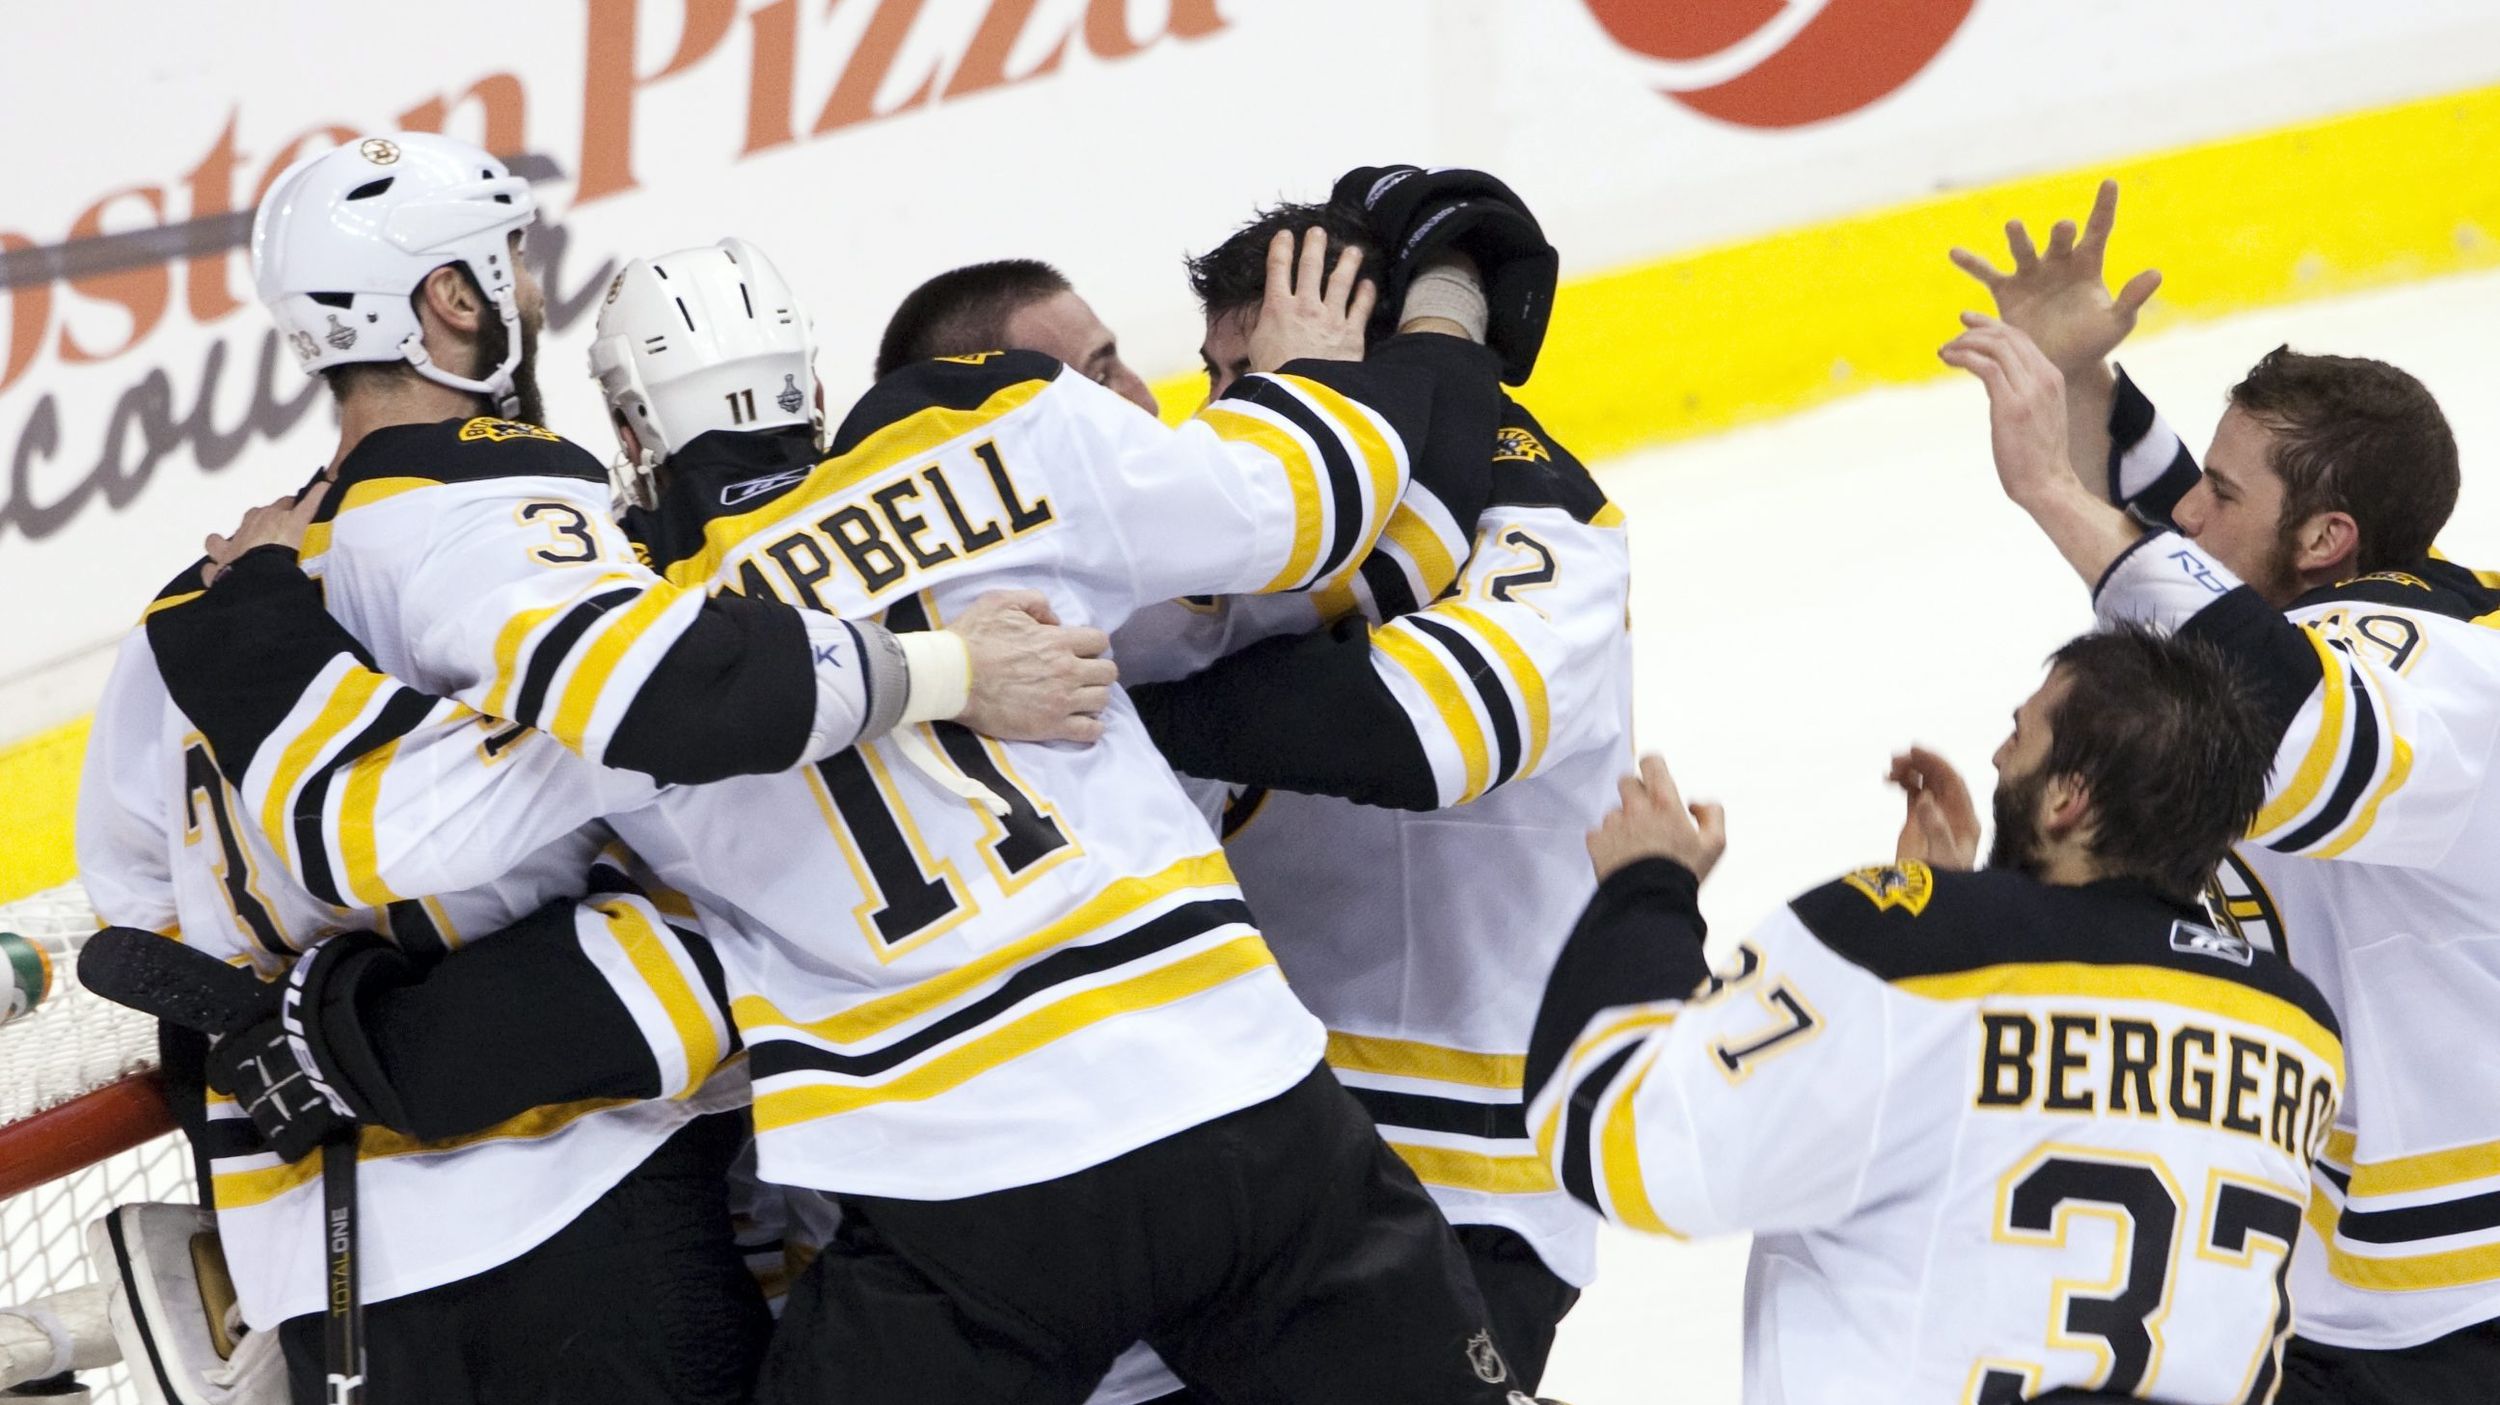 2011 NHL Playoffs: 10 Best Game 7's in Stanley Cup Finals History